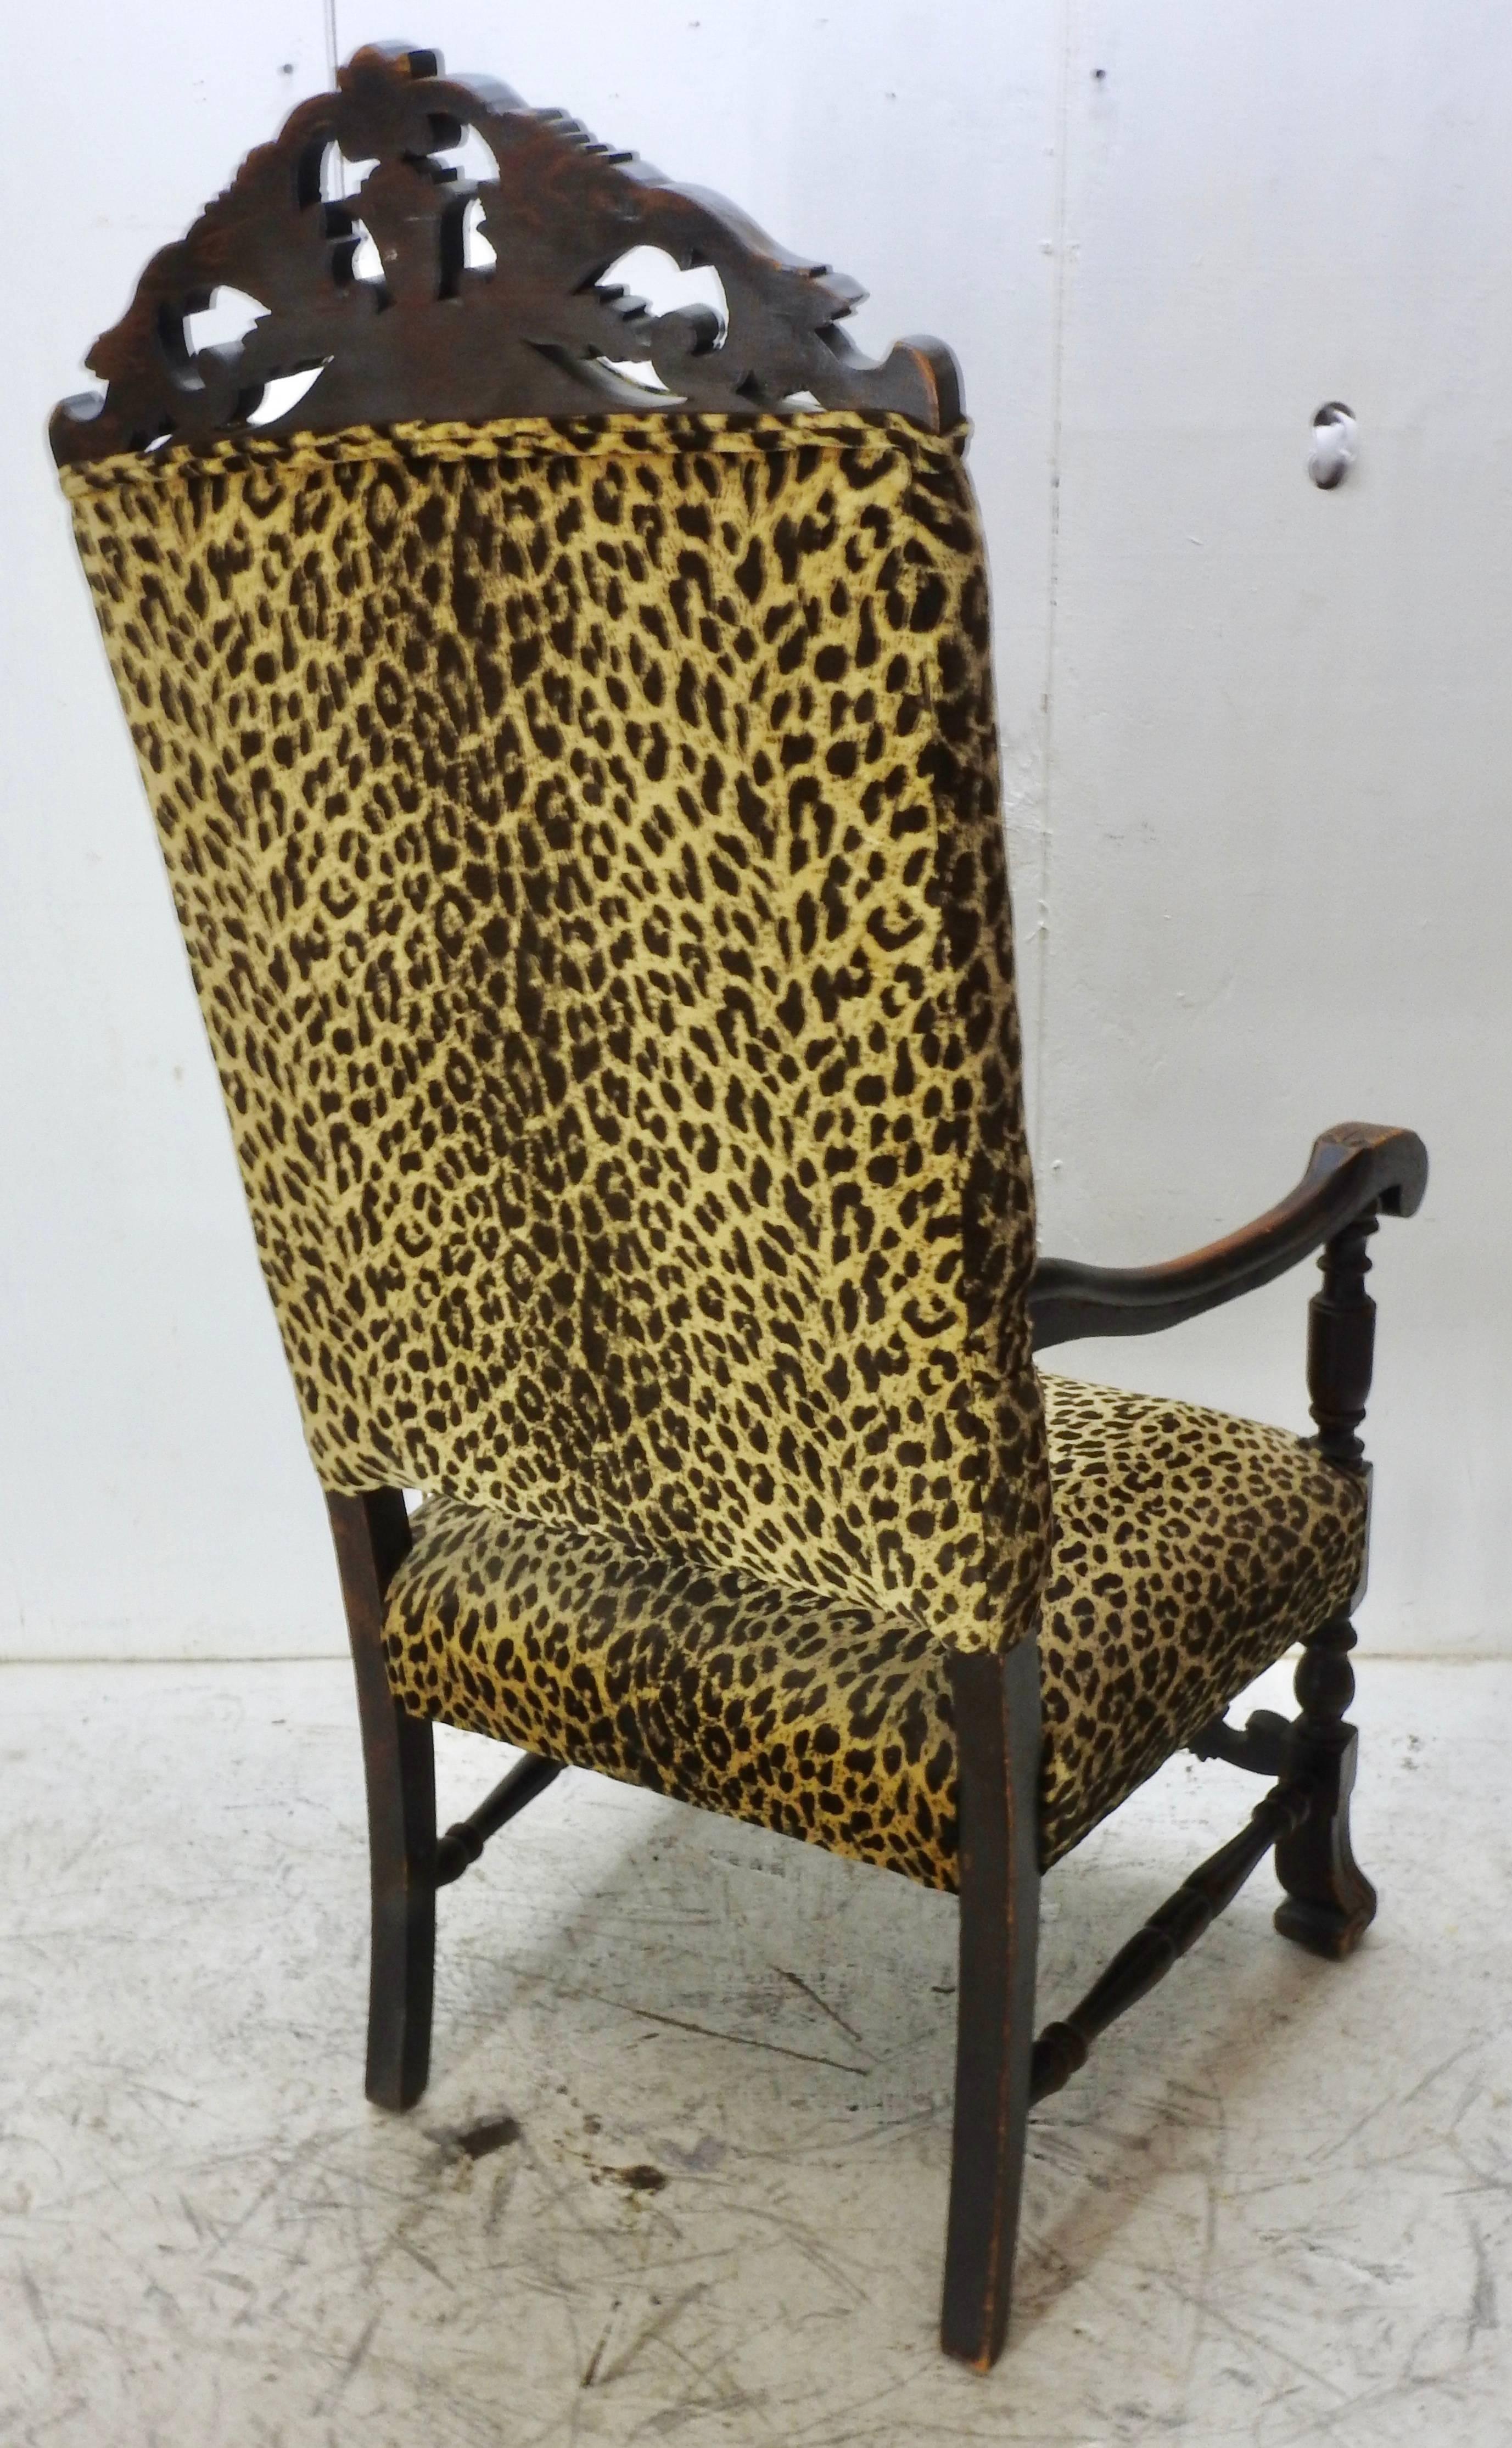 We offer this gorgeous German carved high back chair that is in a dark stained walnut. With intricate scroll work detail at the top and one as the front stretcher. Leopard print upholstery covers the seat and back of this chair and will make a great